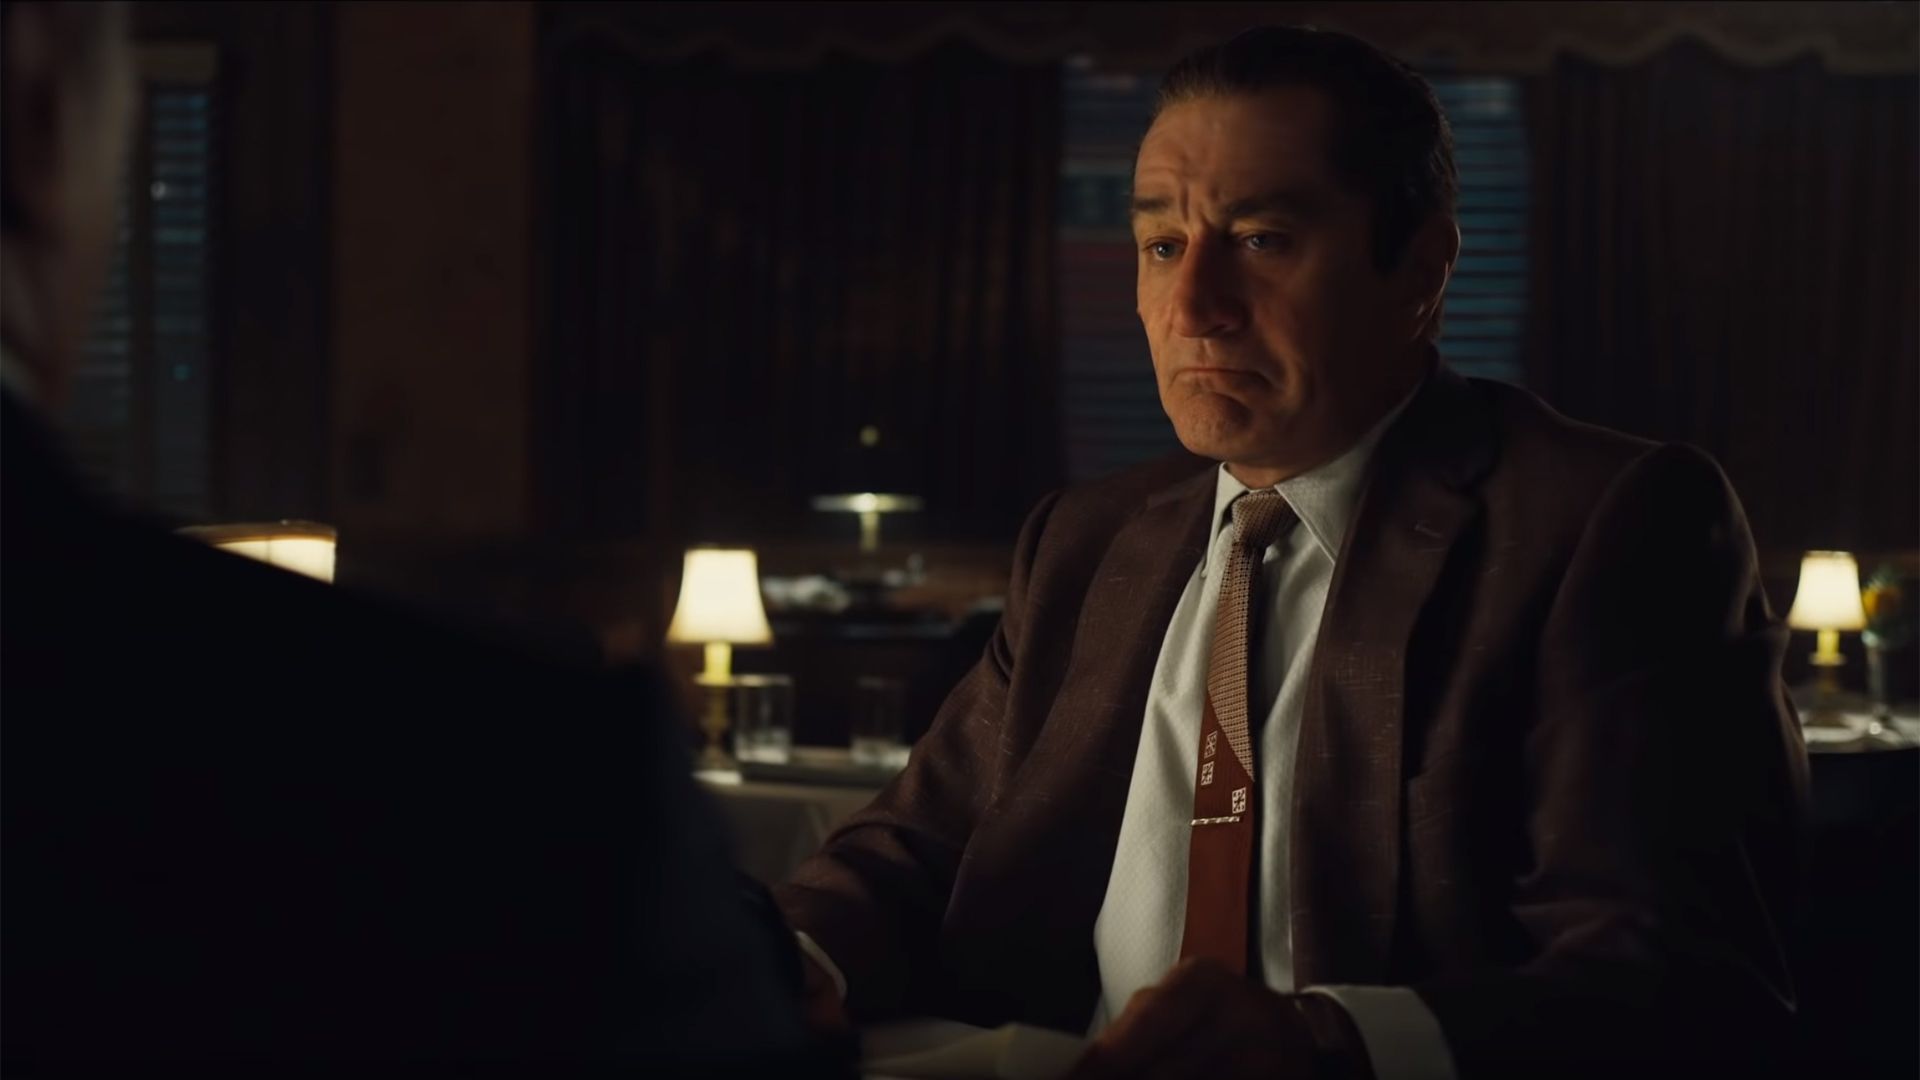 Netflix offers first look at deaged De Niro in trailer for Scorsese's